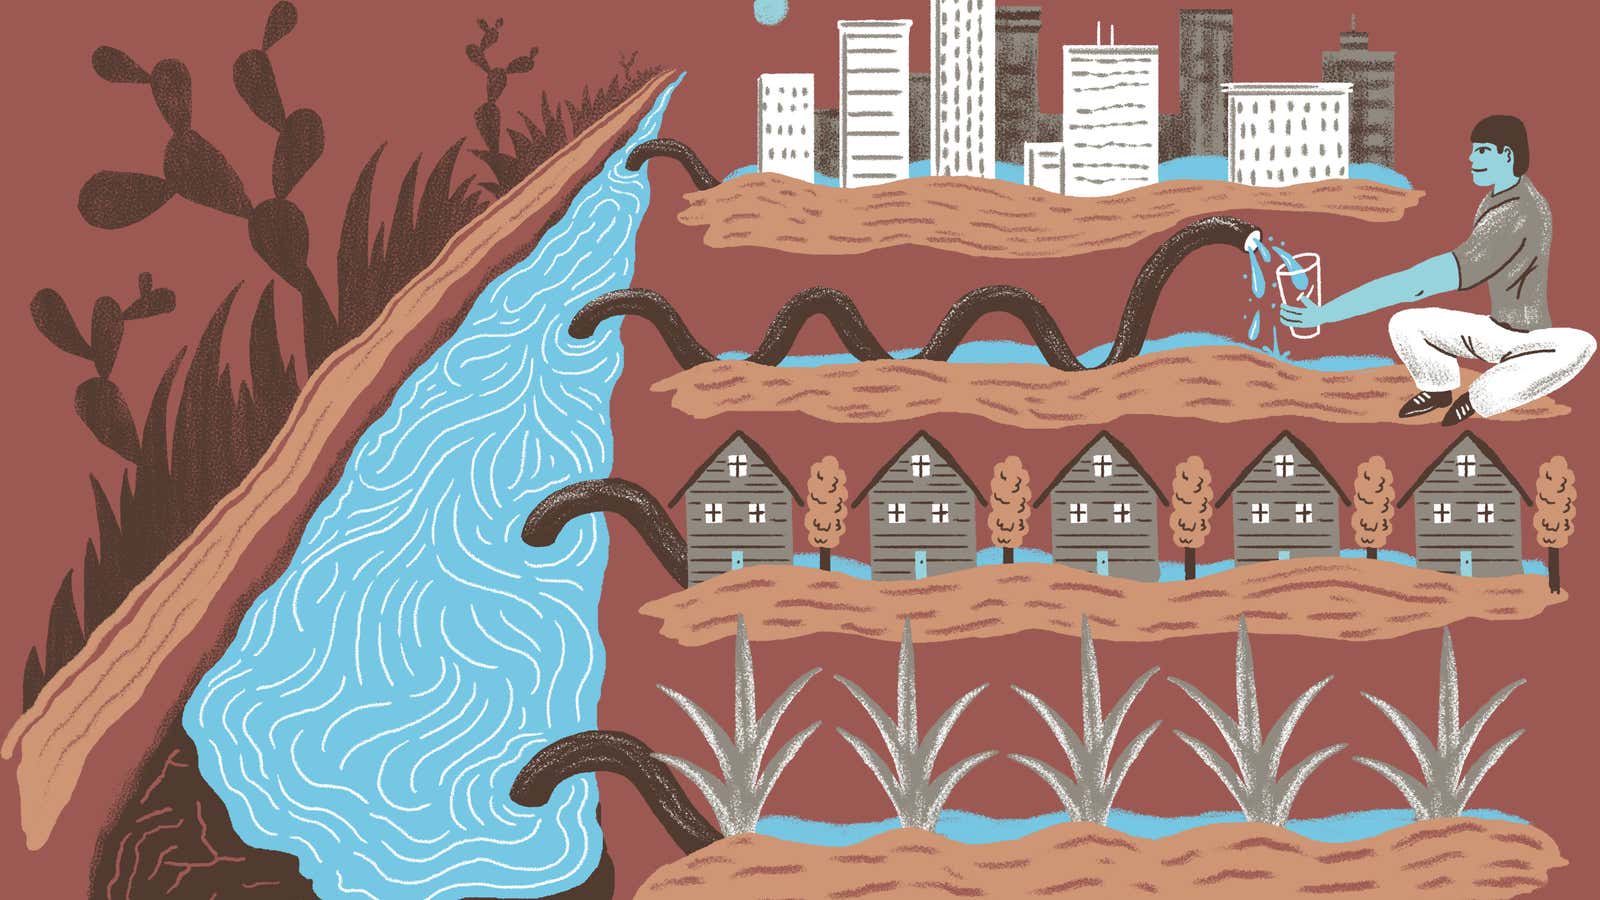 Illustration of how water is used in the Rio Grande Valley of Texas.